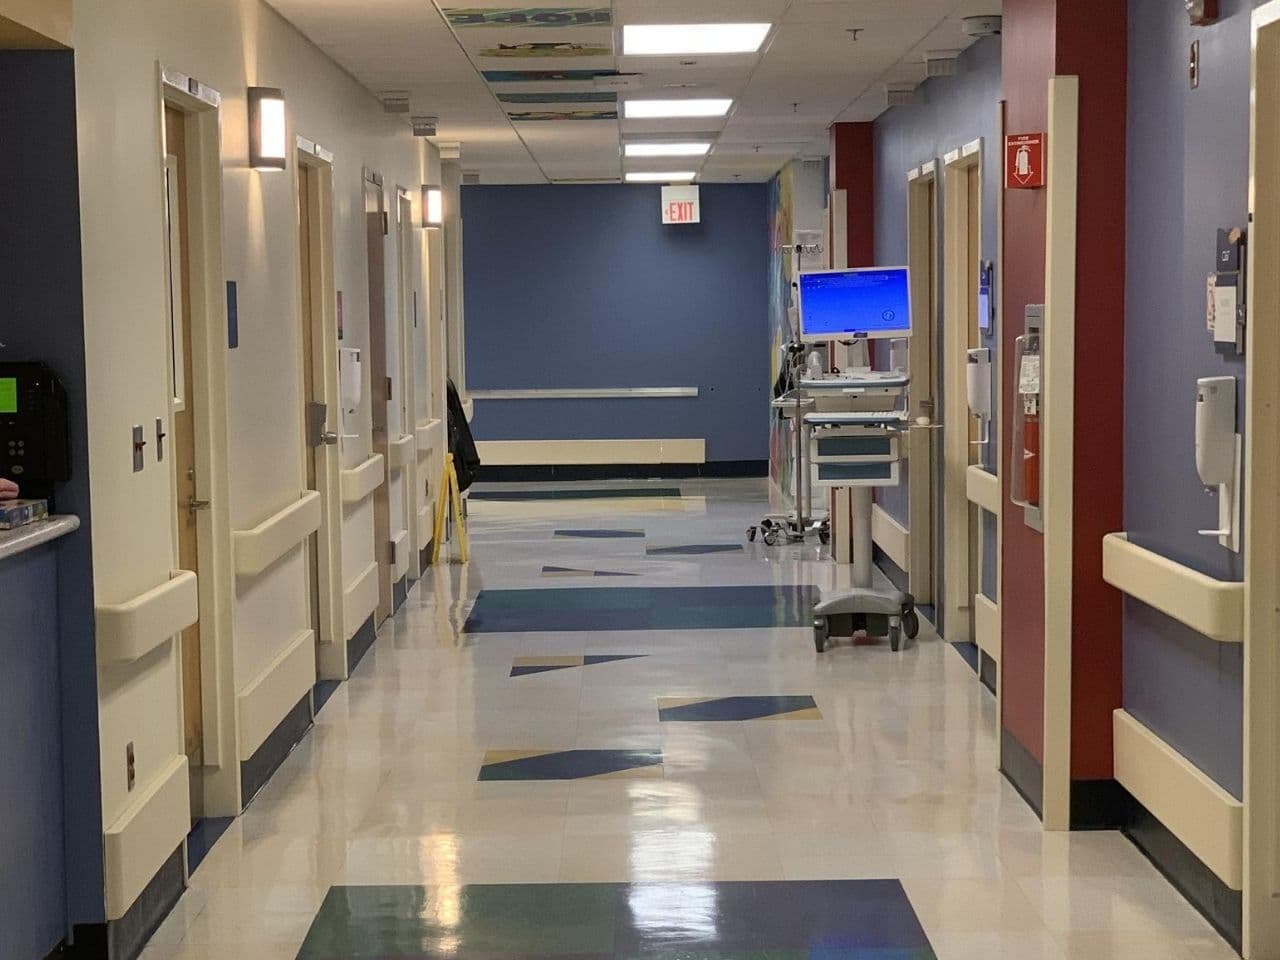 A hallway on the inpatient unit with bright colors and a computer stand in the hall.